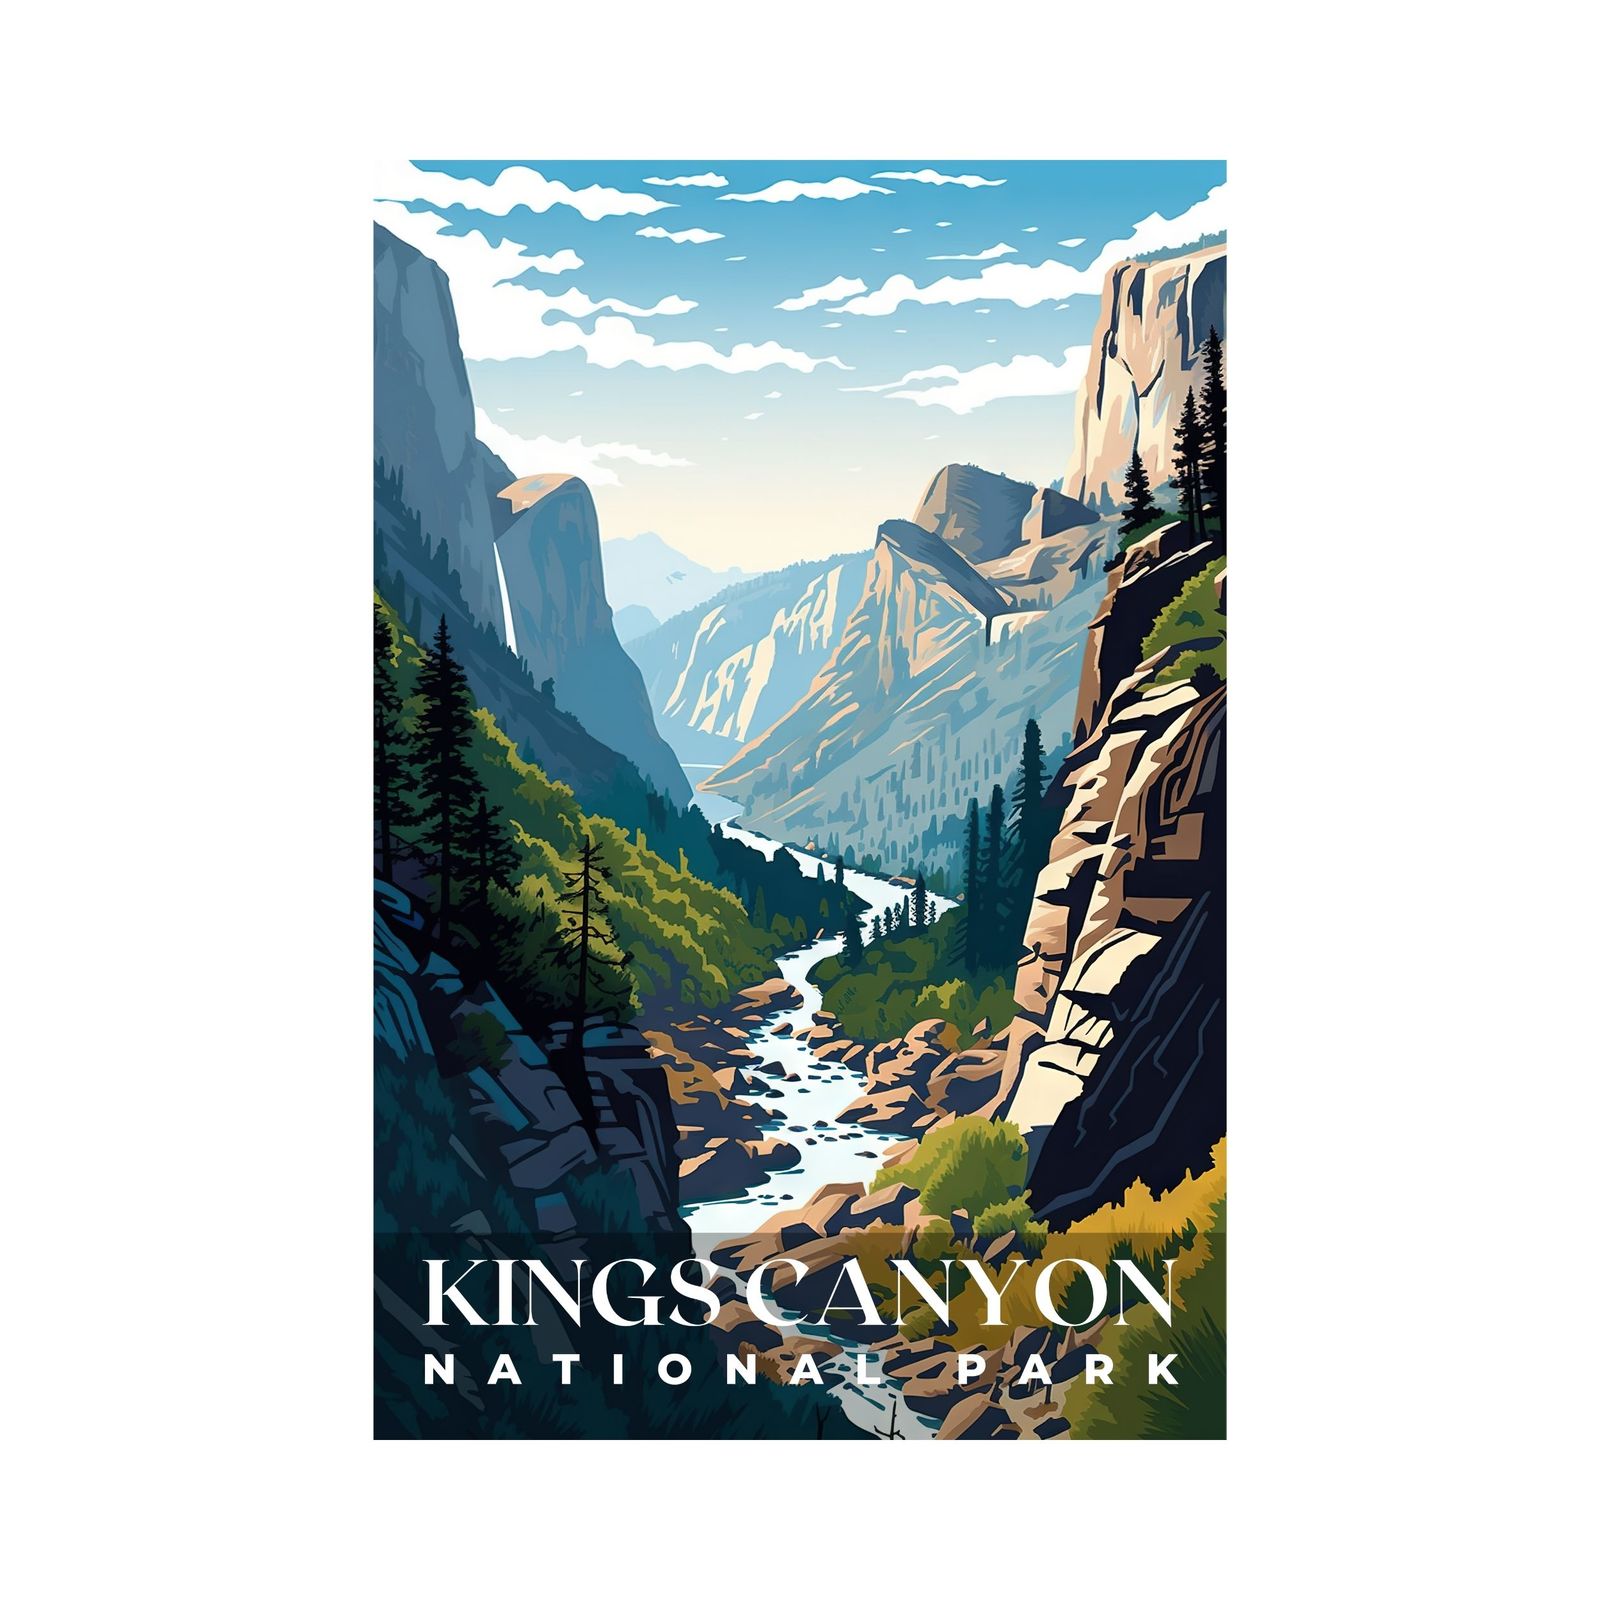 Kings Canyon National Park Poster | S01 - $33.00 - $147.20